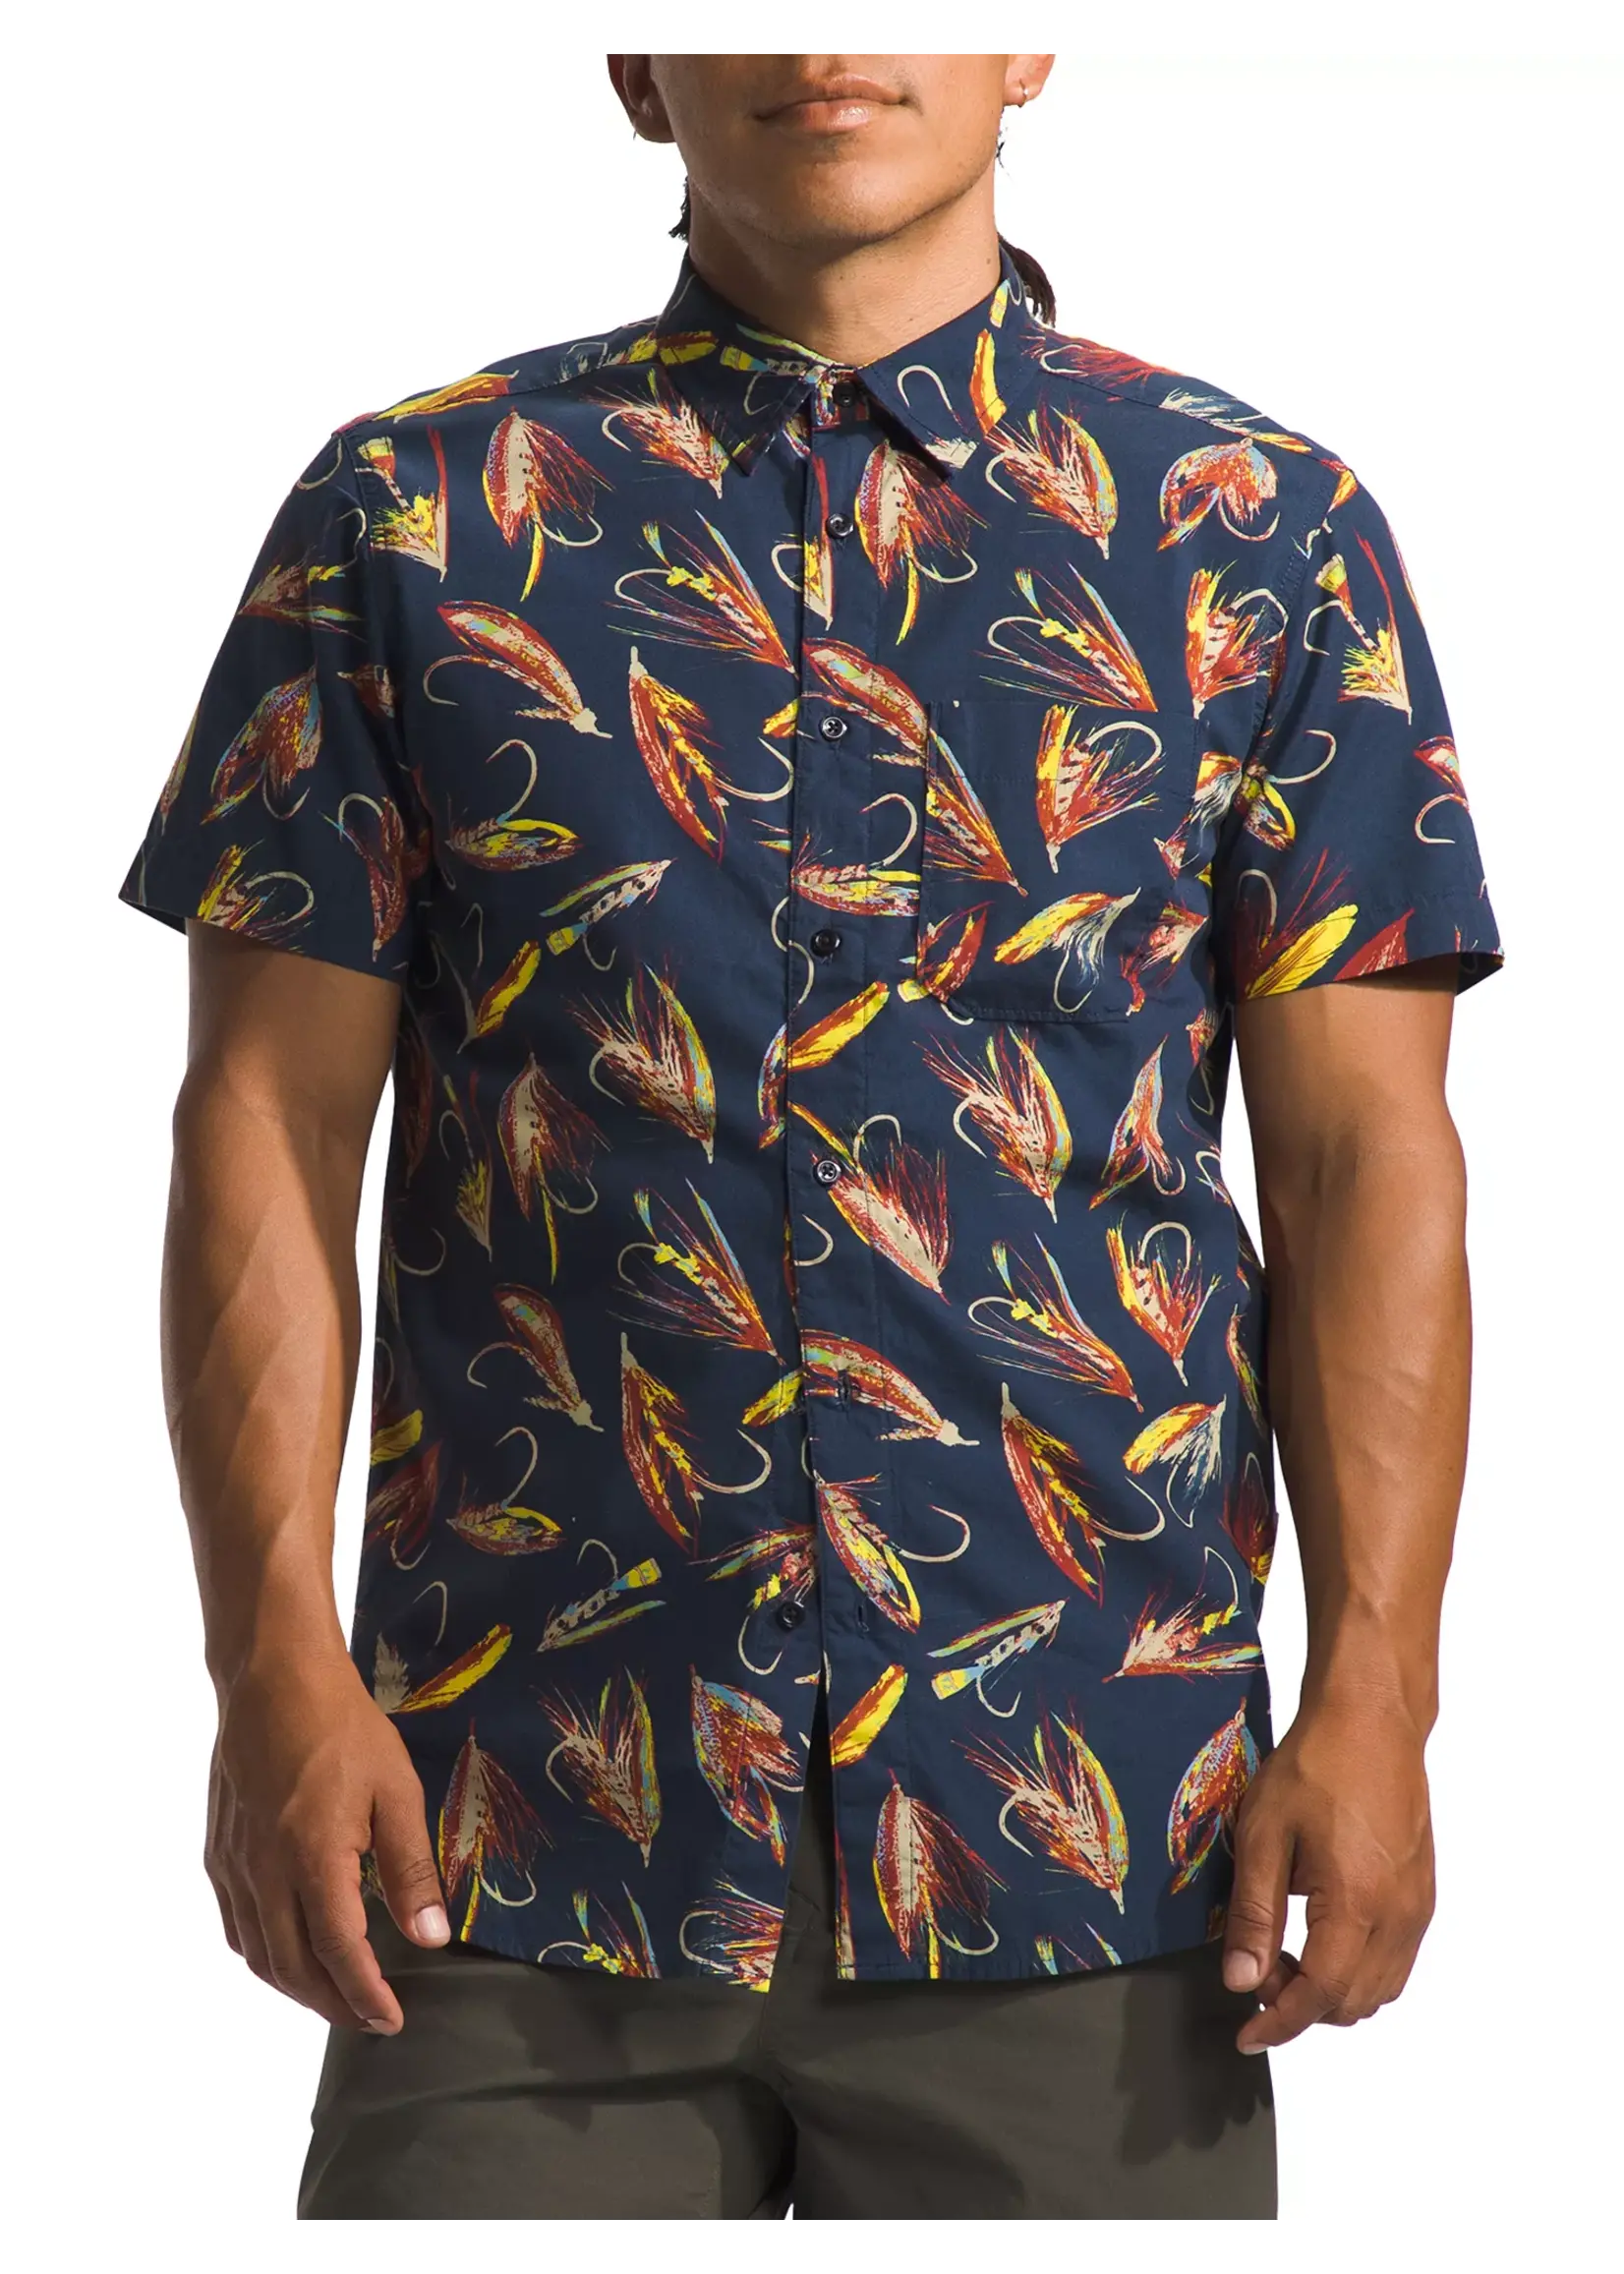 North Face North Face M's S/S Baytrail Pattern Shirt